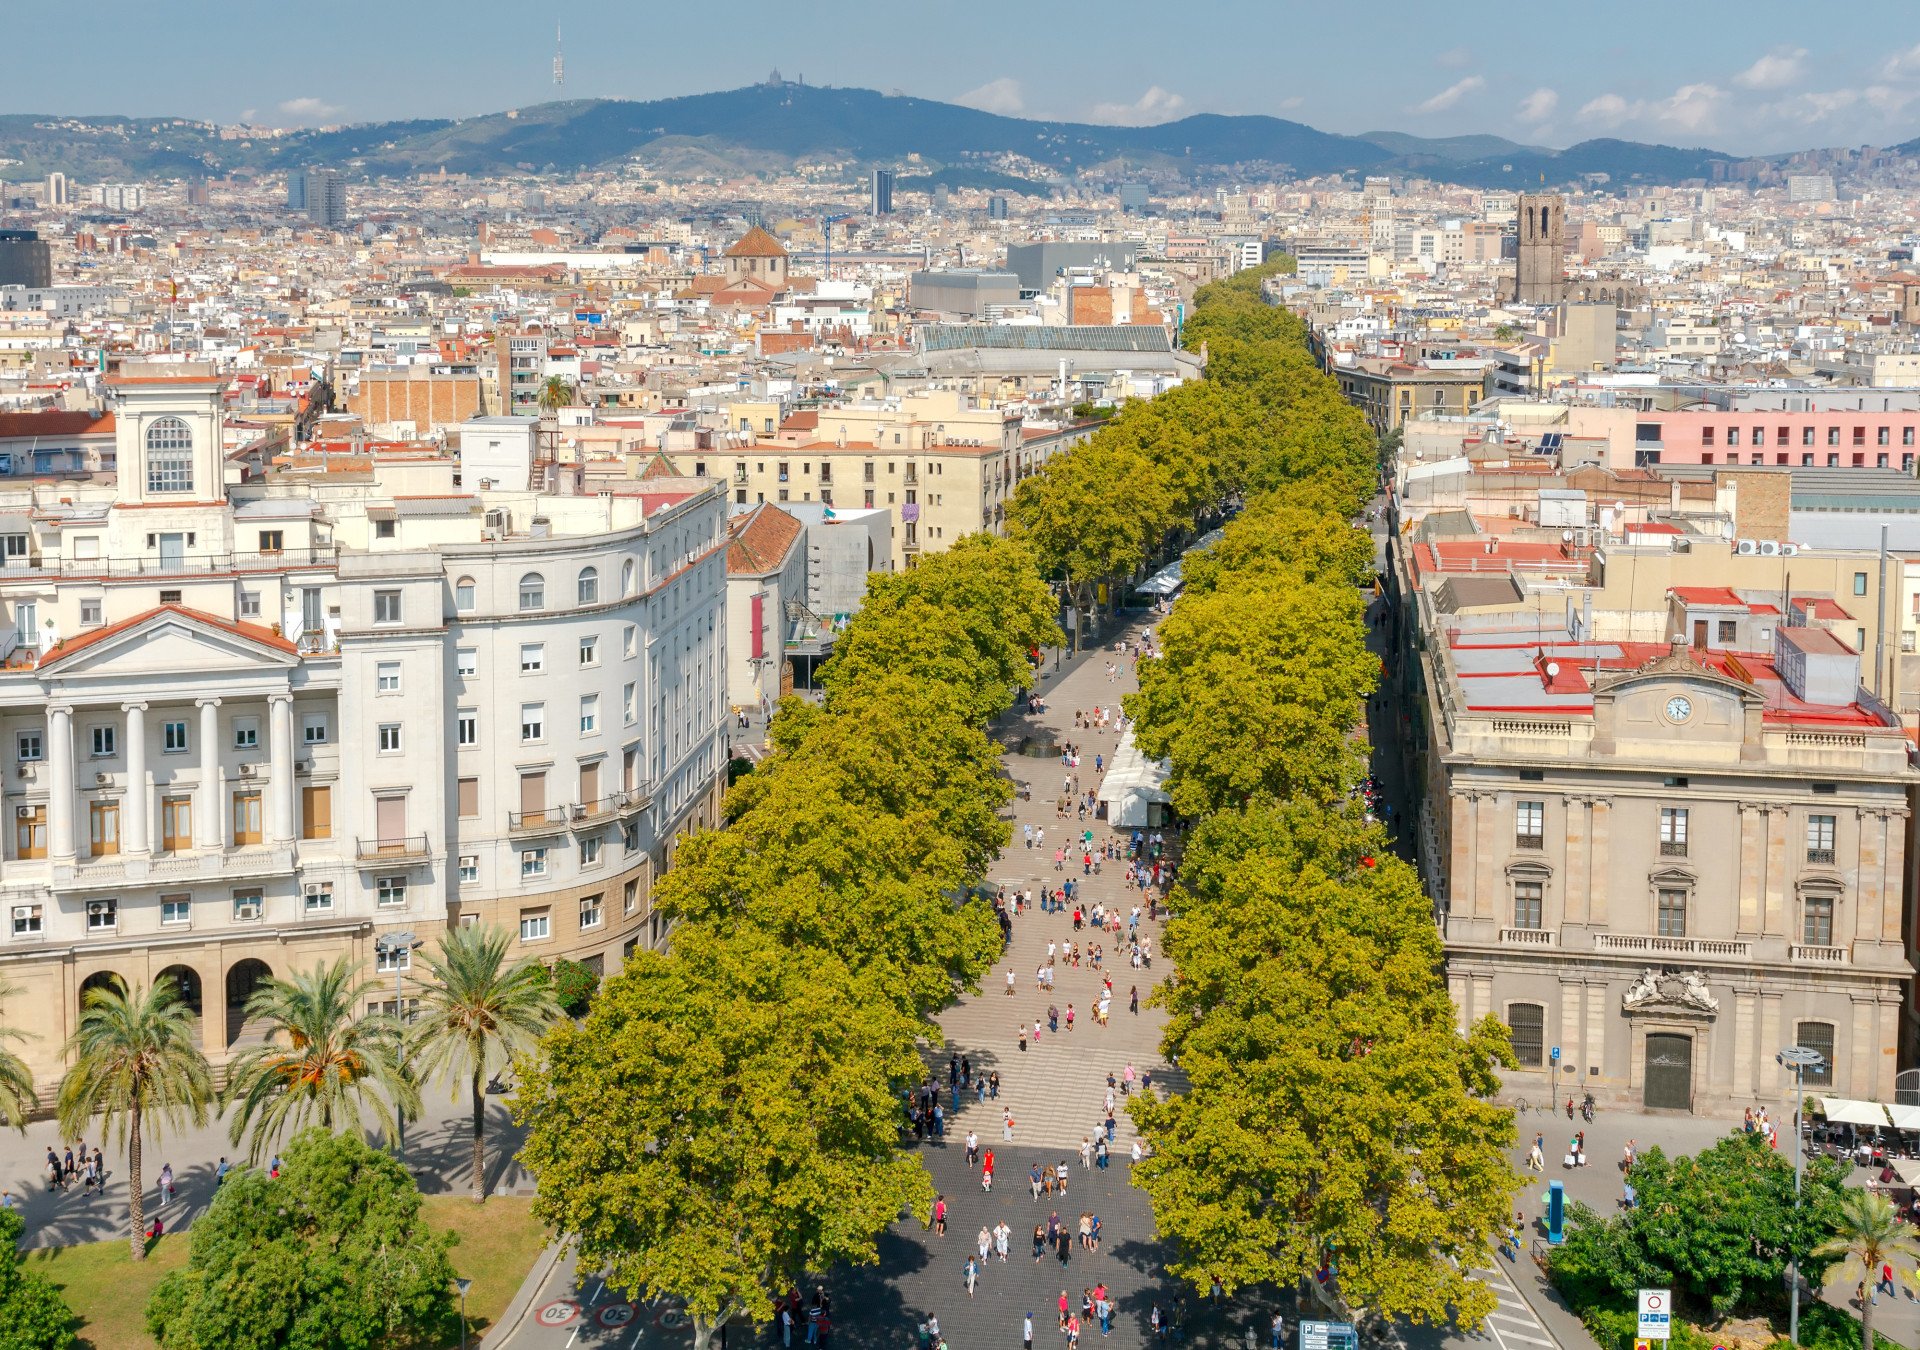 Spain has lots of incredible cities to visit and Barcelona is right up there. The famous Las Ramblas connects the city and is a great place for a stroll.<p><a href="https://www.msn.com/en-sg/community/channel/vid-7xx8mnucu55yw63we9va2gwr7uihbxwc68fxqp25x6tg4ftibpra?cvid=94631541bc0f4f89bfd59158d696ad7e">Follow us and access great exclusive content every day</a></p>